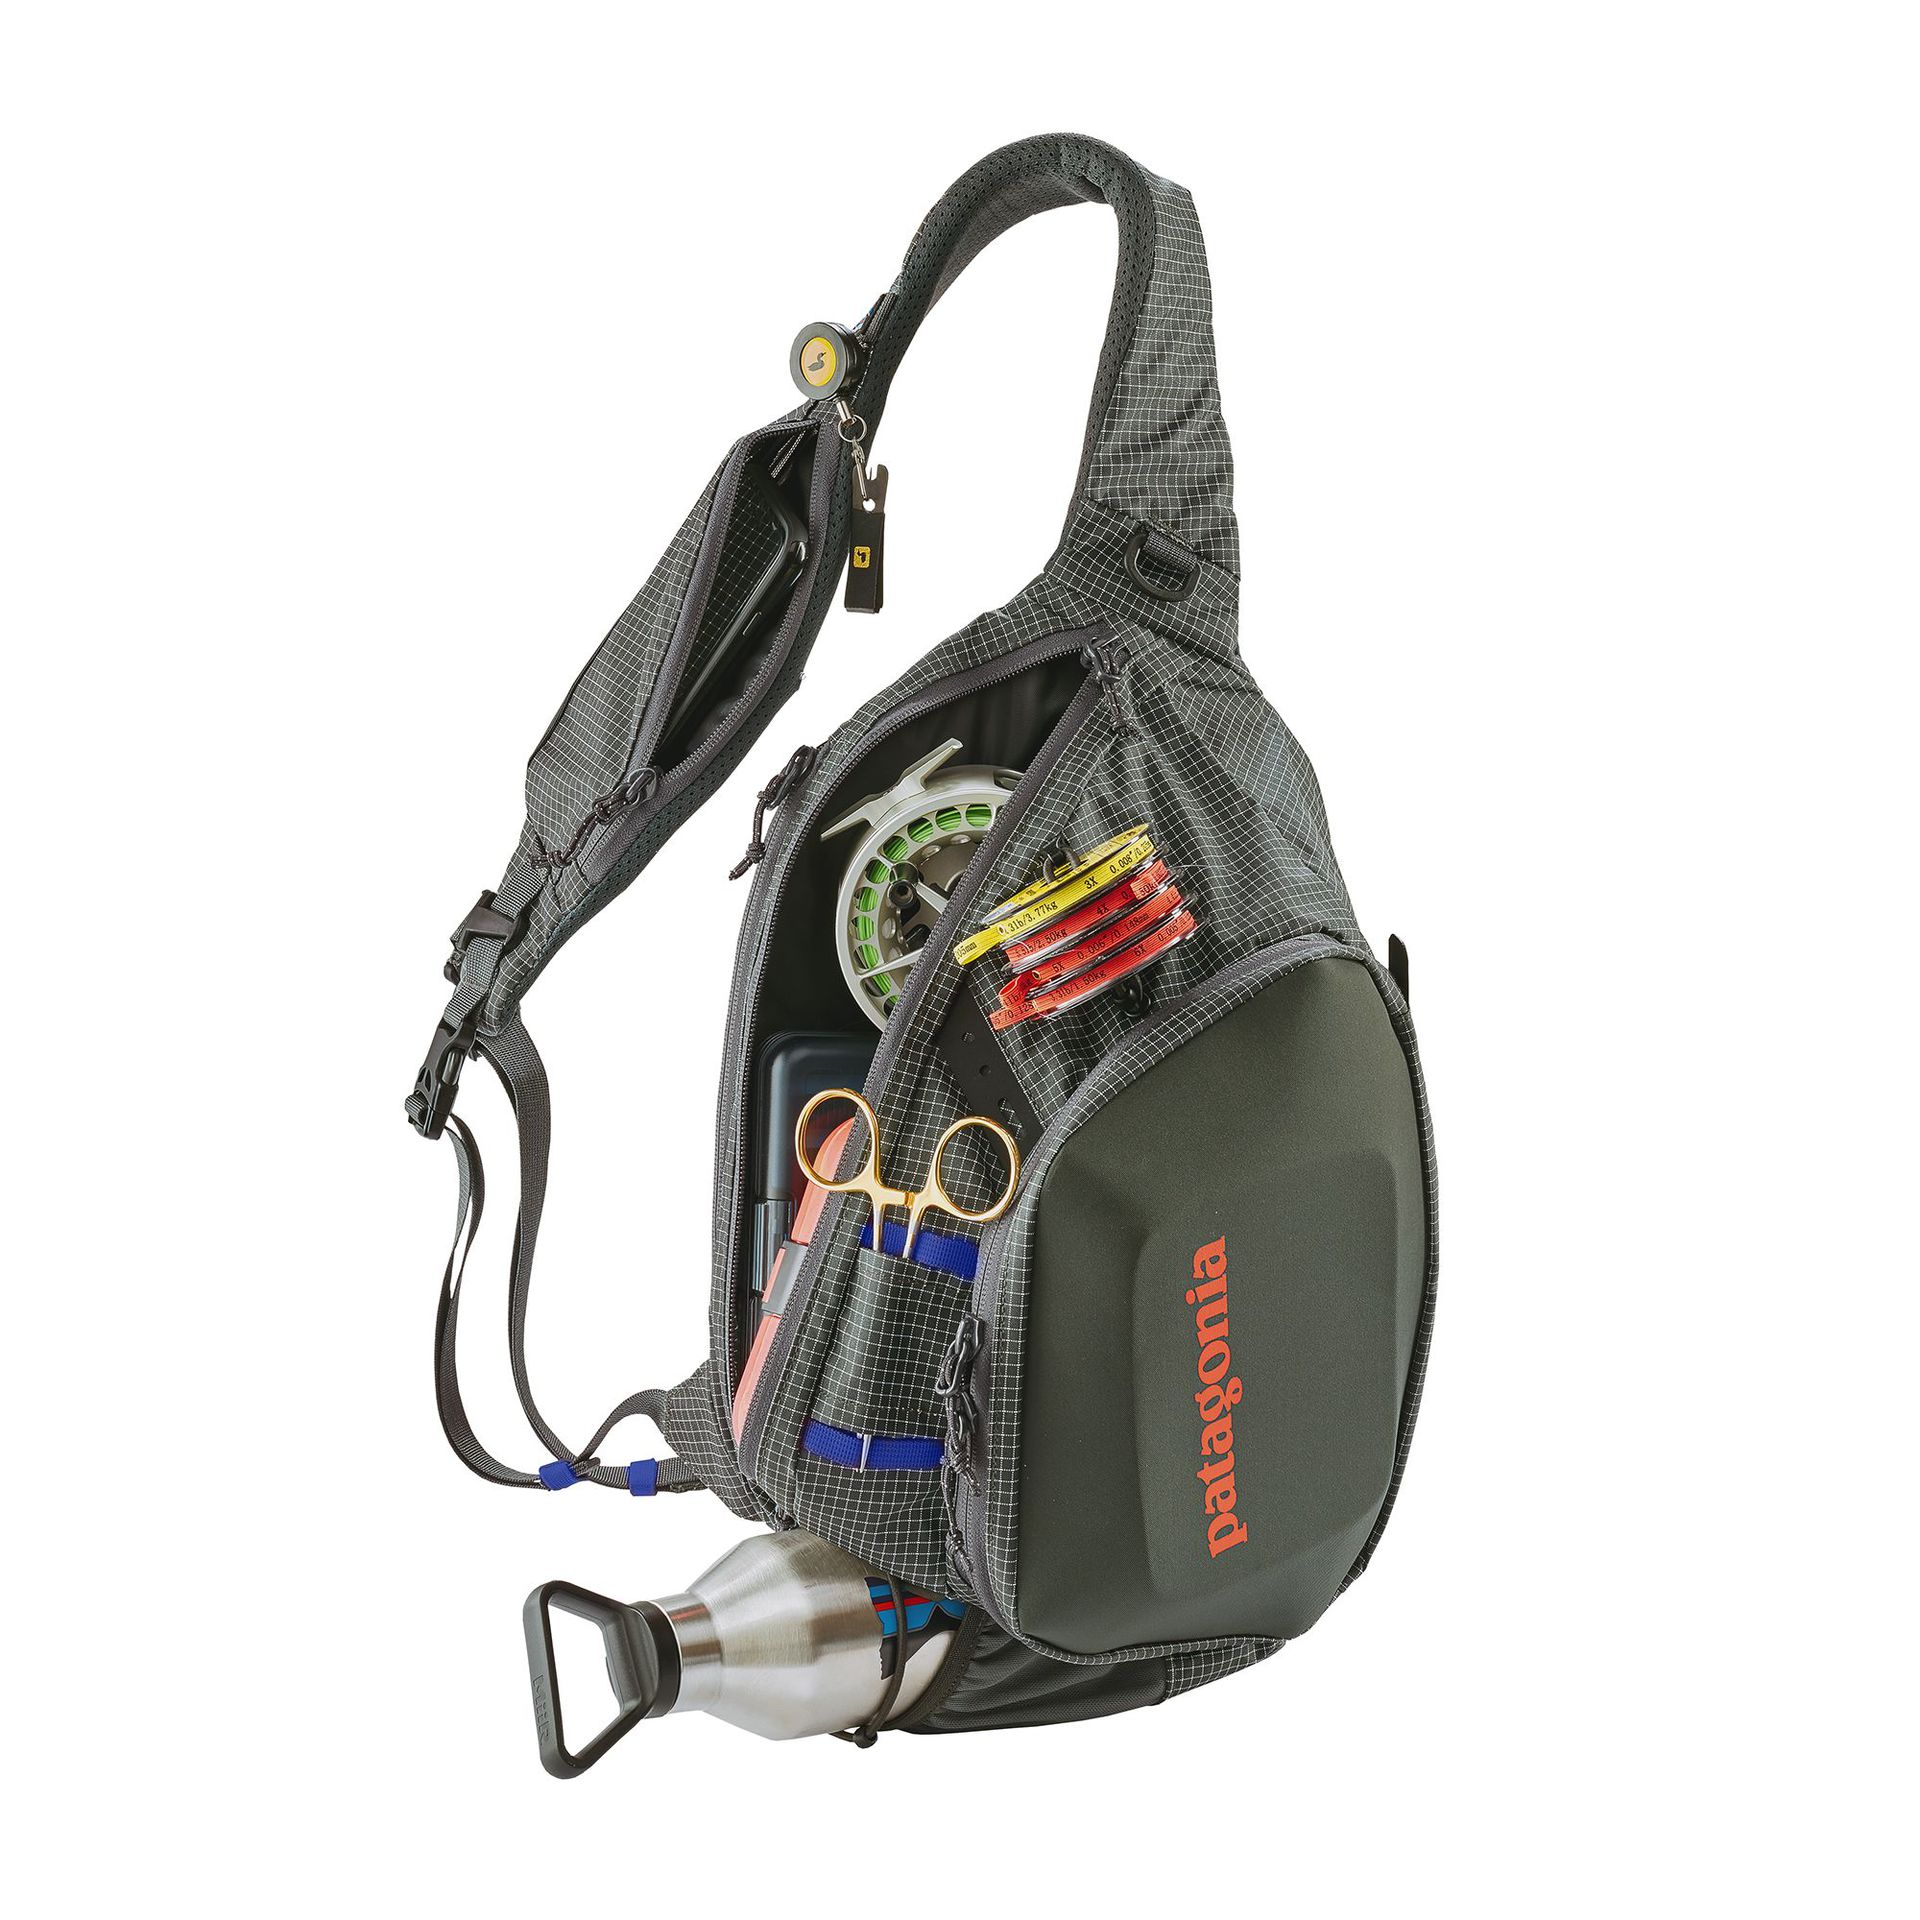 Patagonia Stealth Atom Fly Fishing Sling 15L | Ole Florida Fly Shop